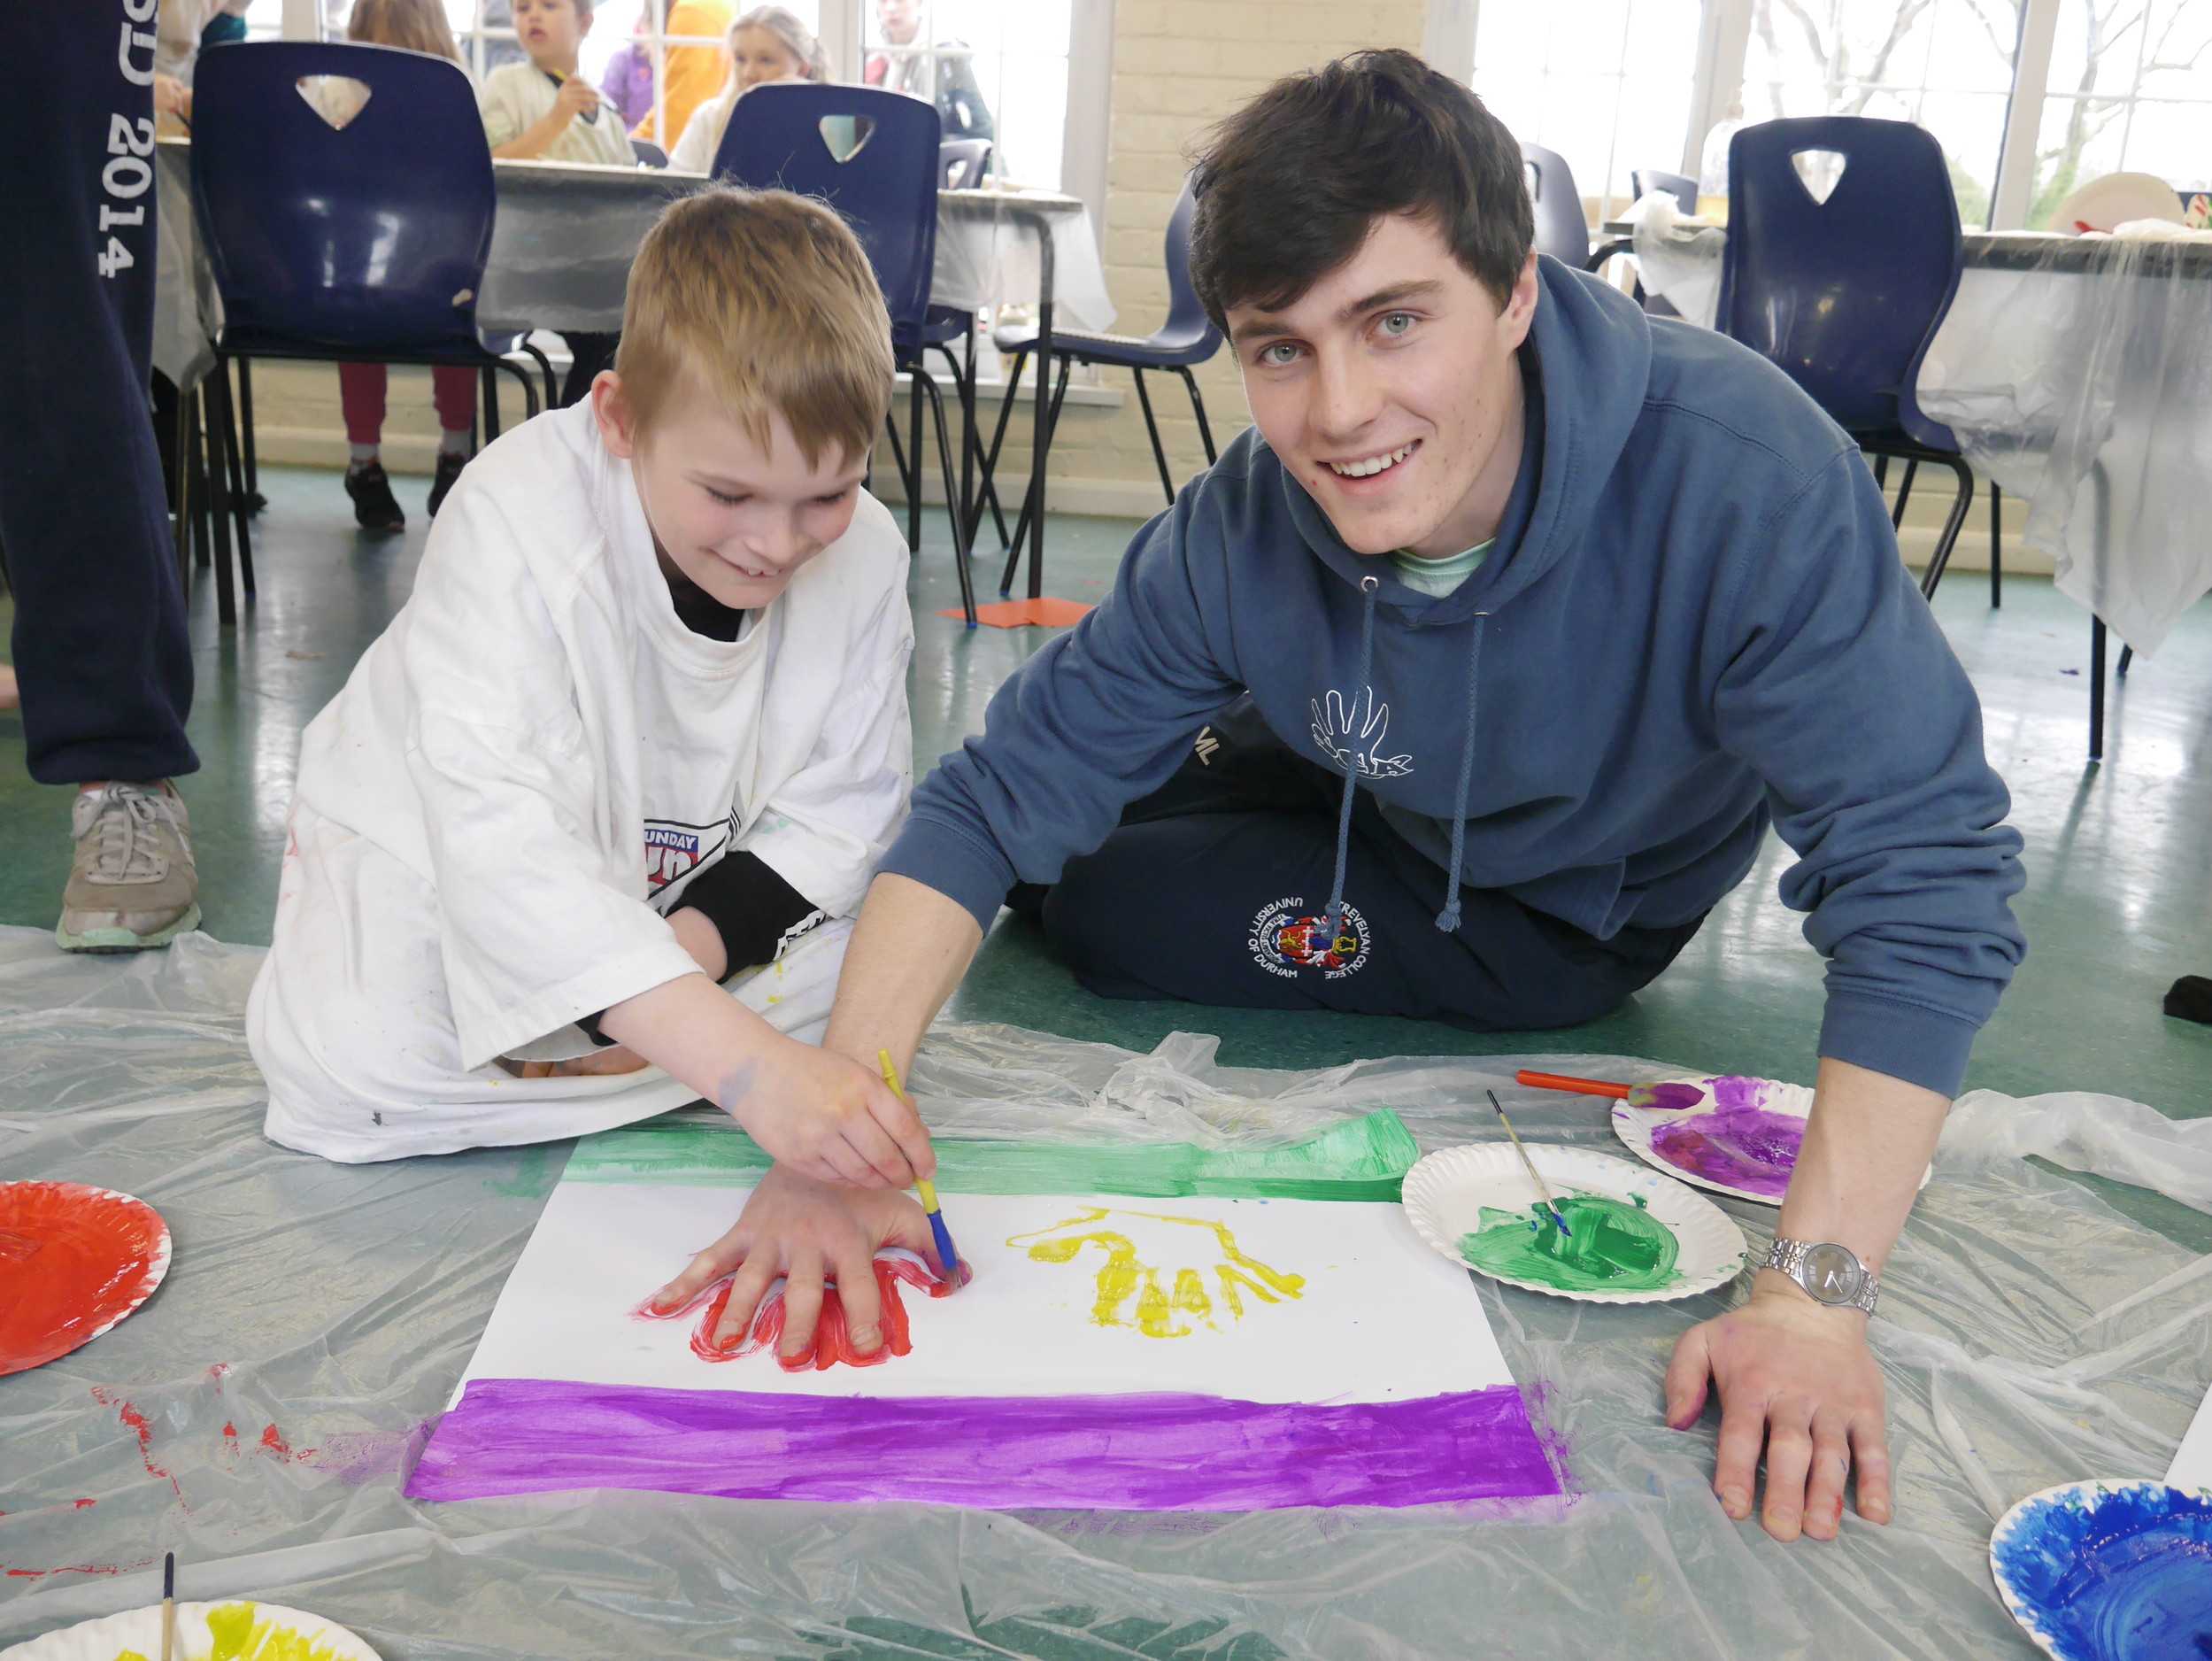 Student hand painting with a child